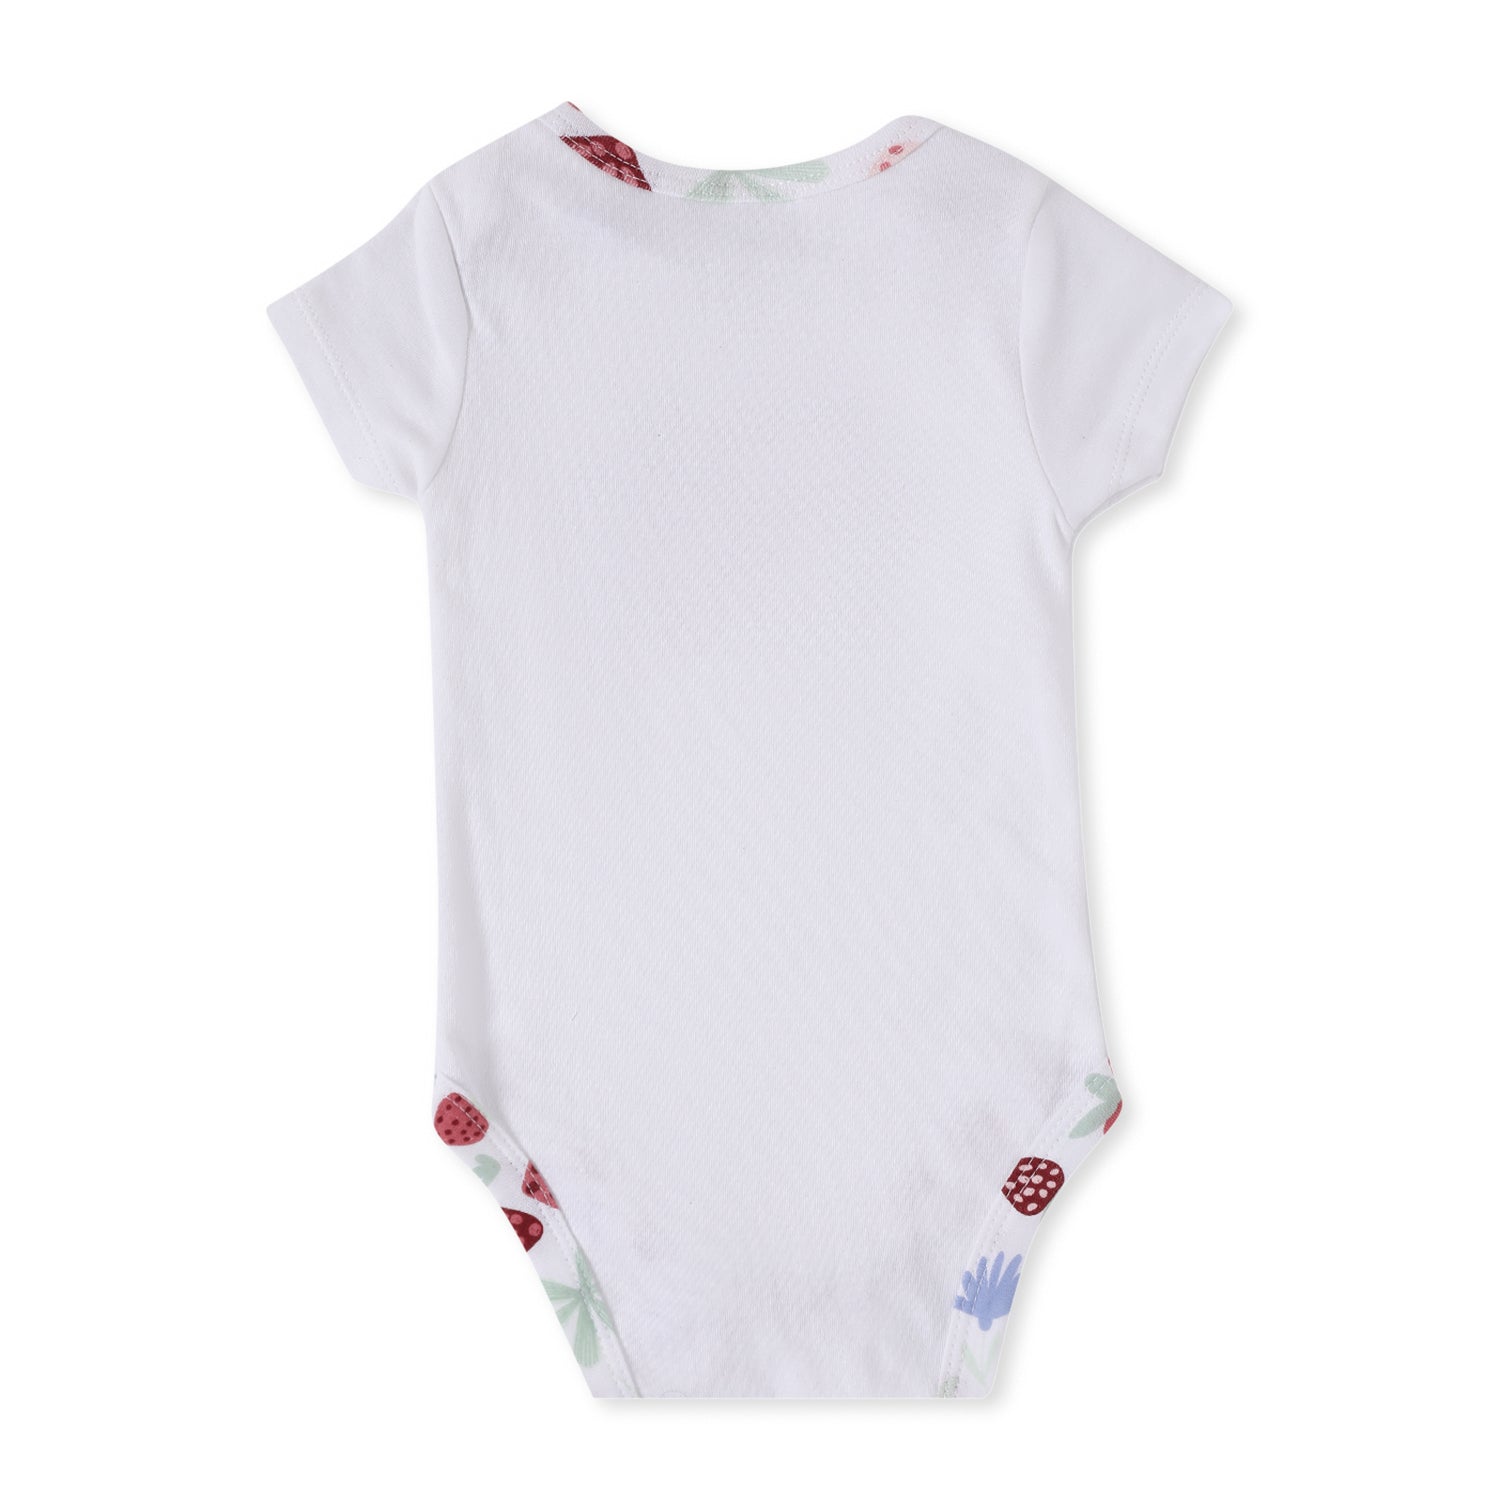 Giggles & Wiggles Berry Sweet Onesies With Legging